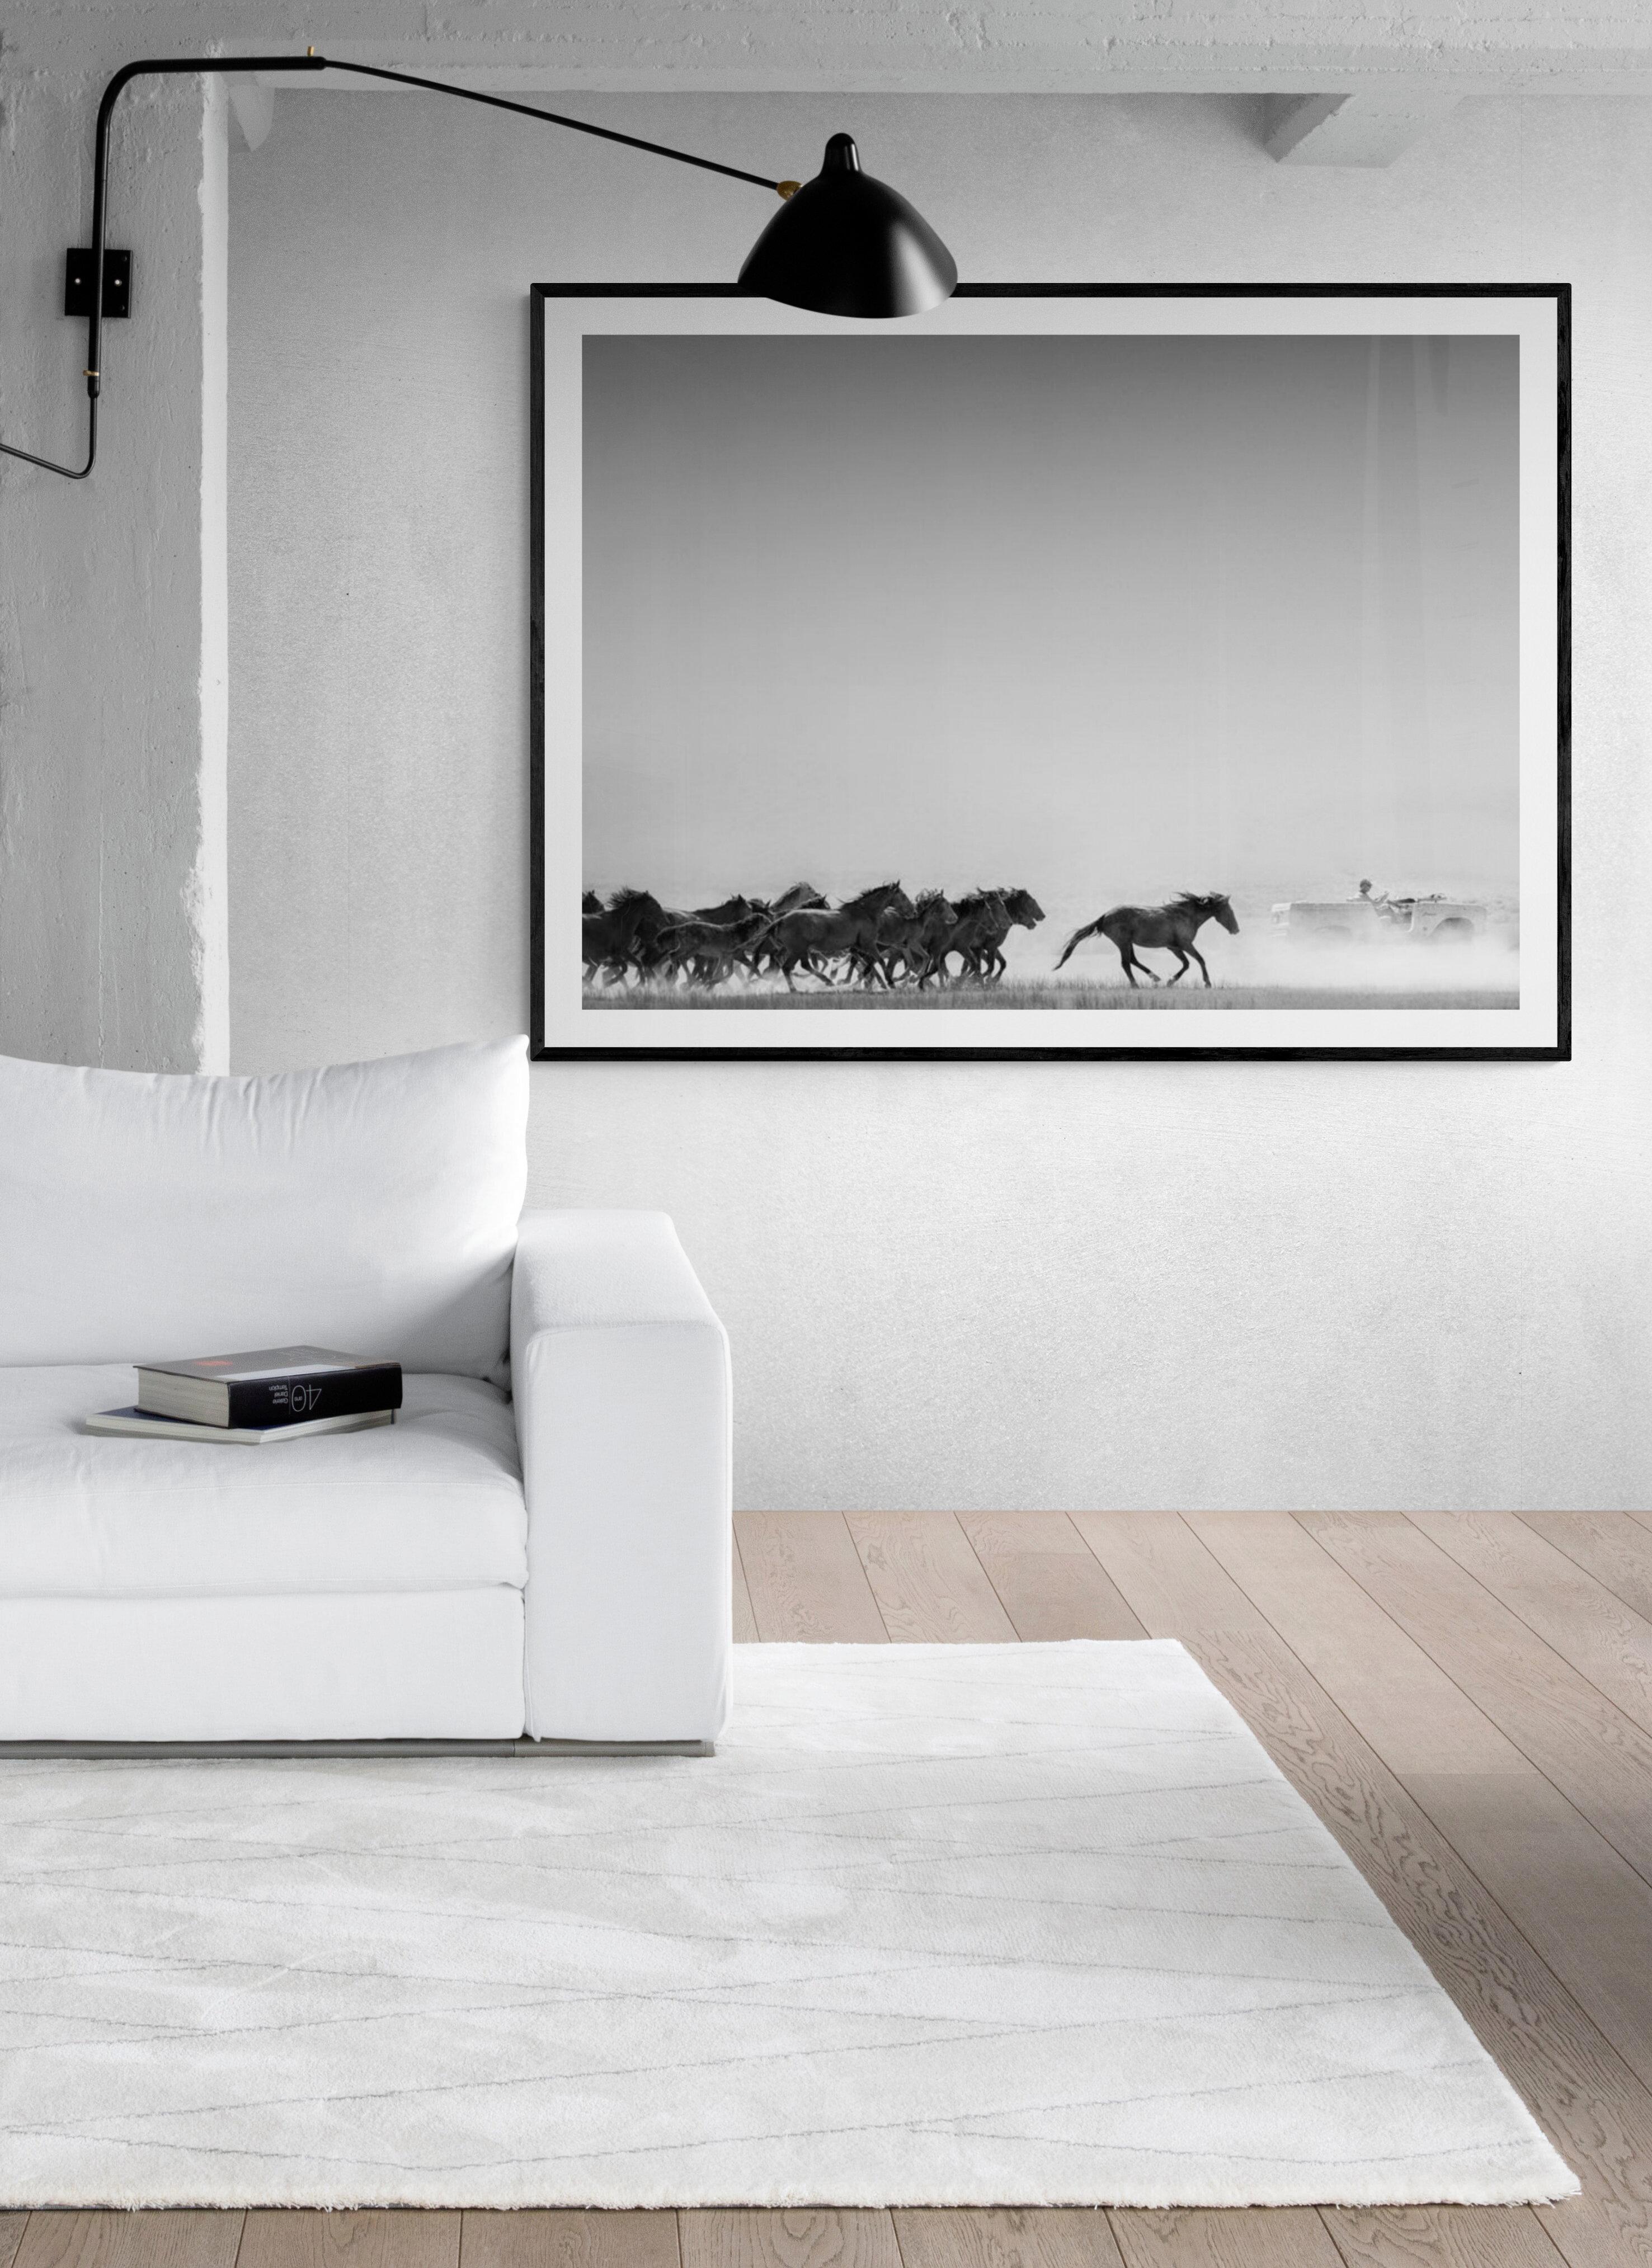 AMERICAN HORSE POWER 28x40 Photography Wild Horses Mustangs FORD BRONCO ICON - Gray Black and White Photograph by Shane Russeck